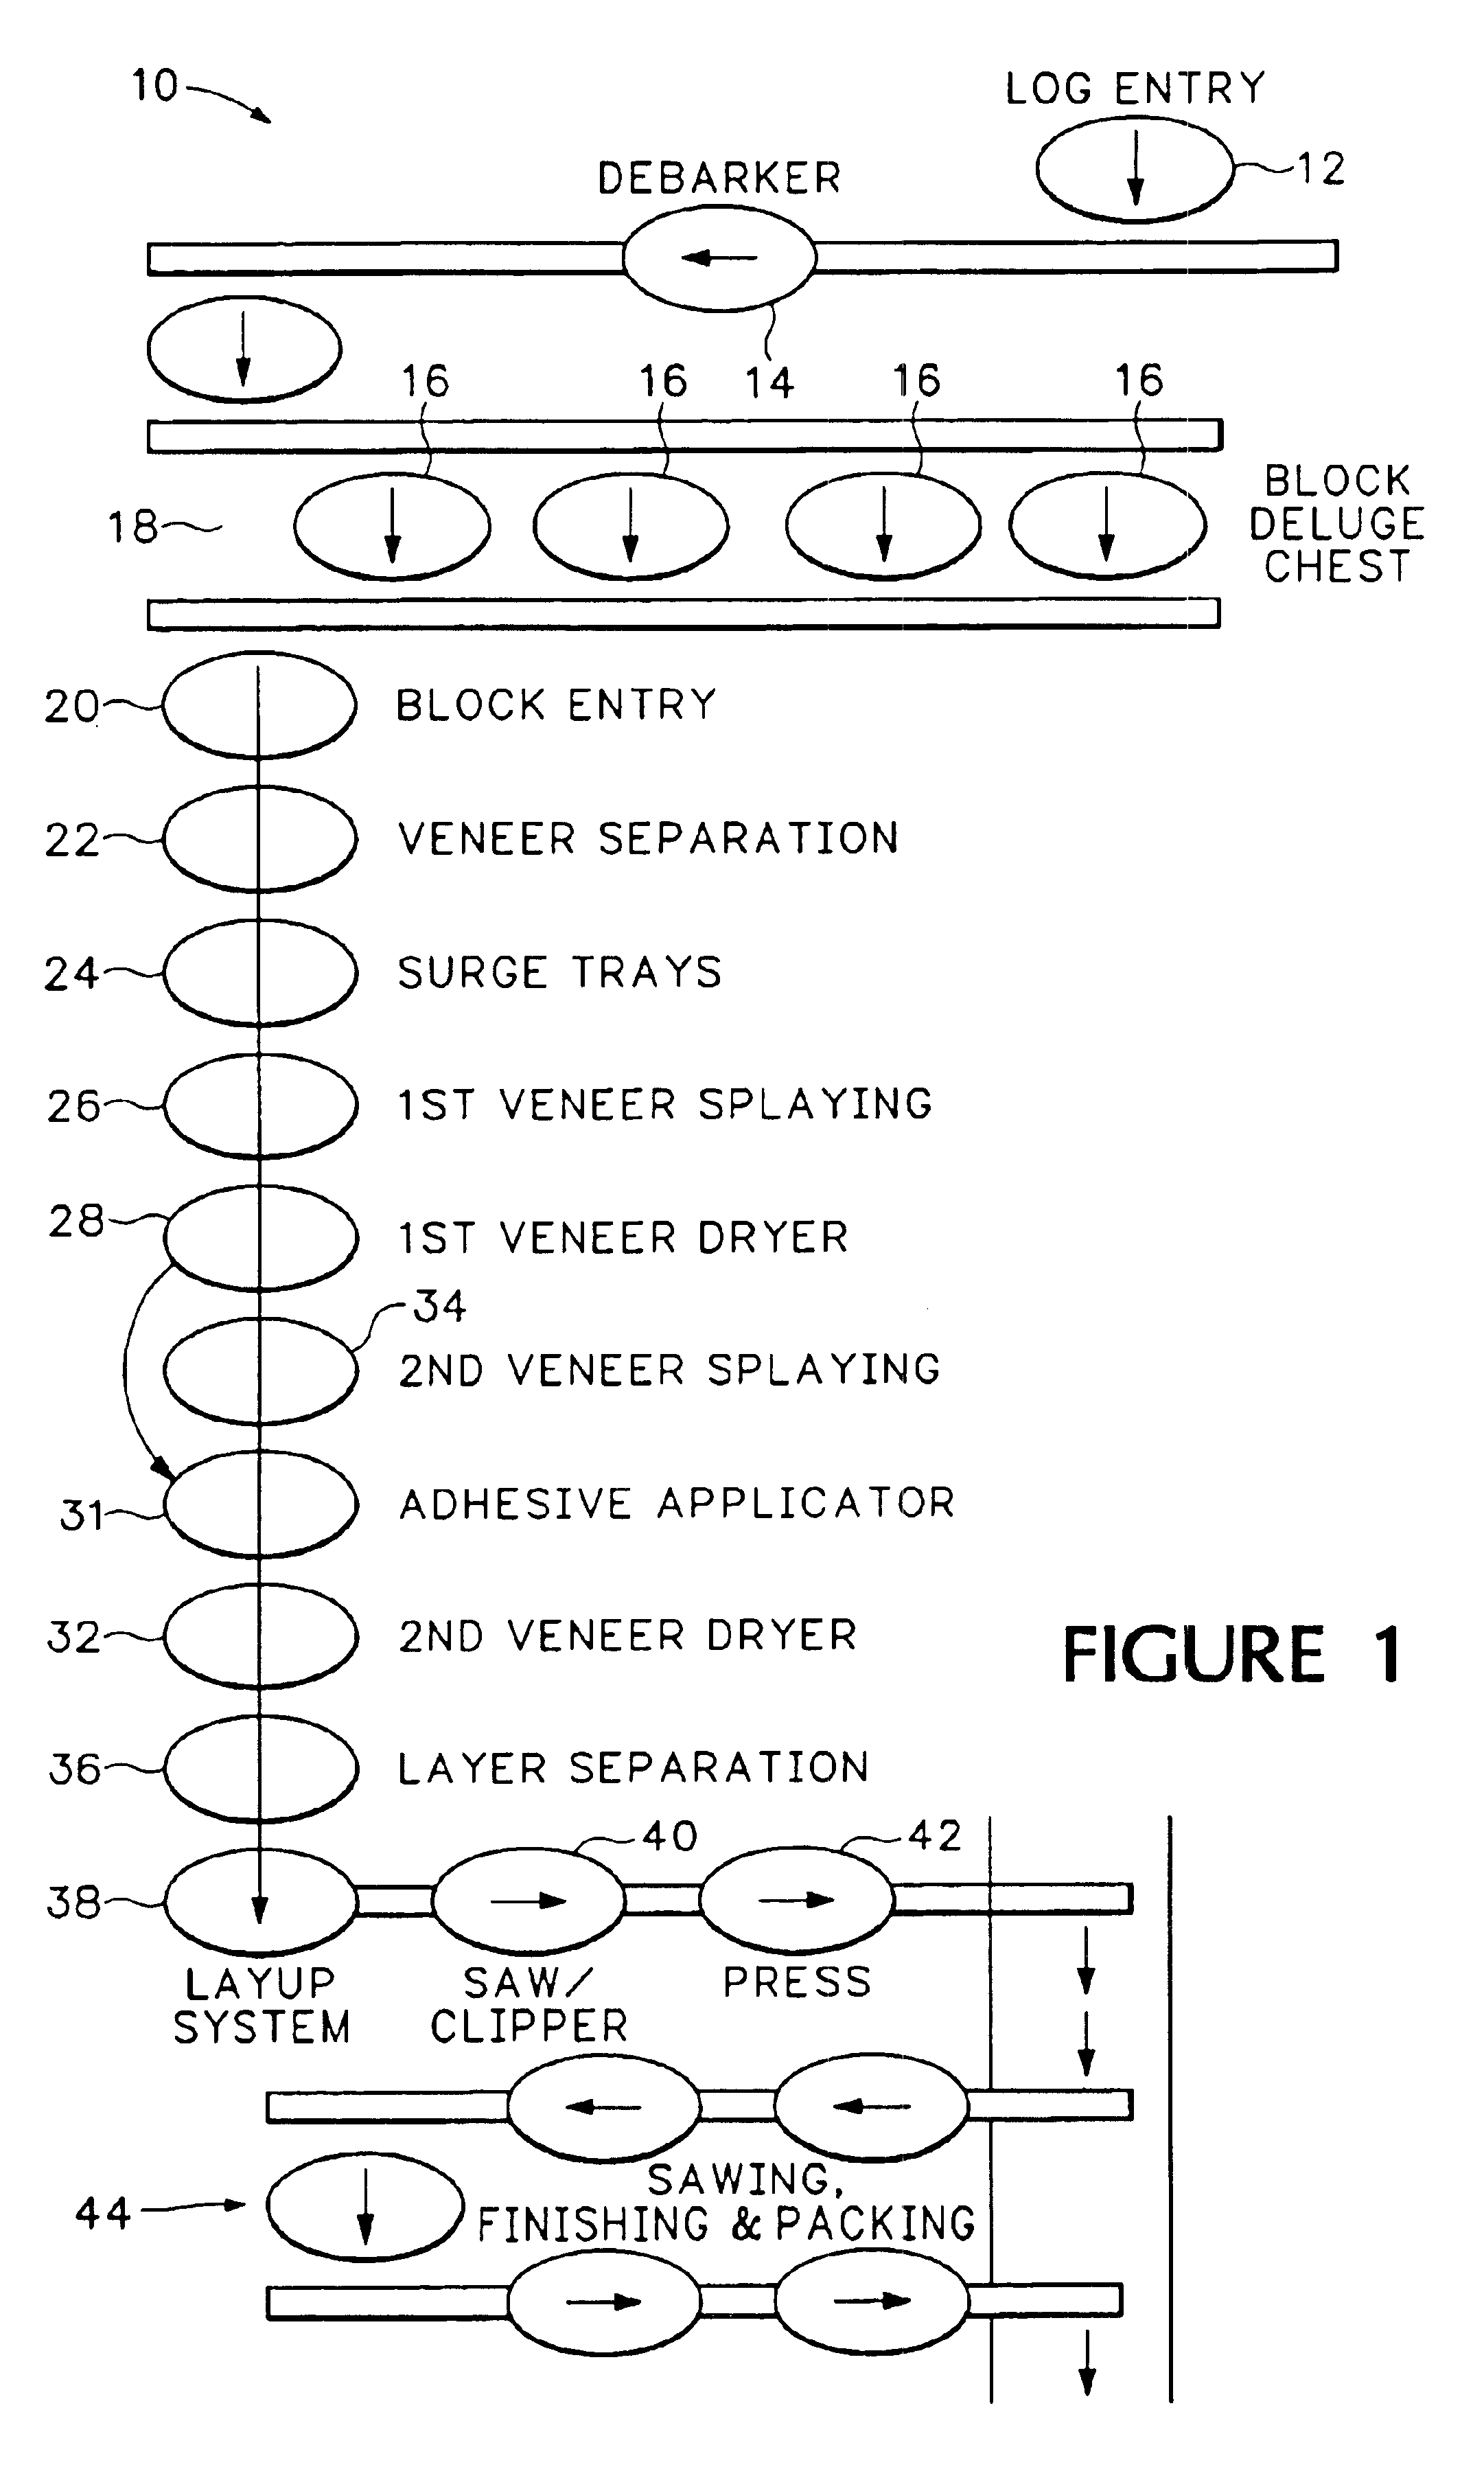 Method for producing a processed continuous veneer ribbon and consolidated processed veneer strand product therefrom